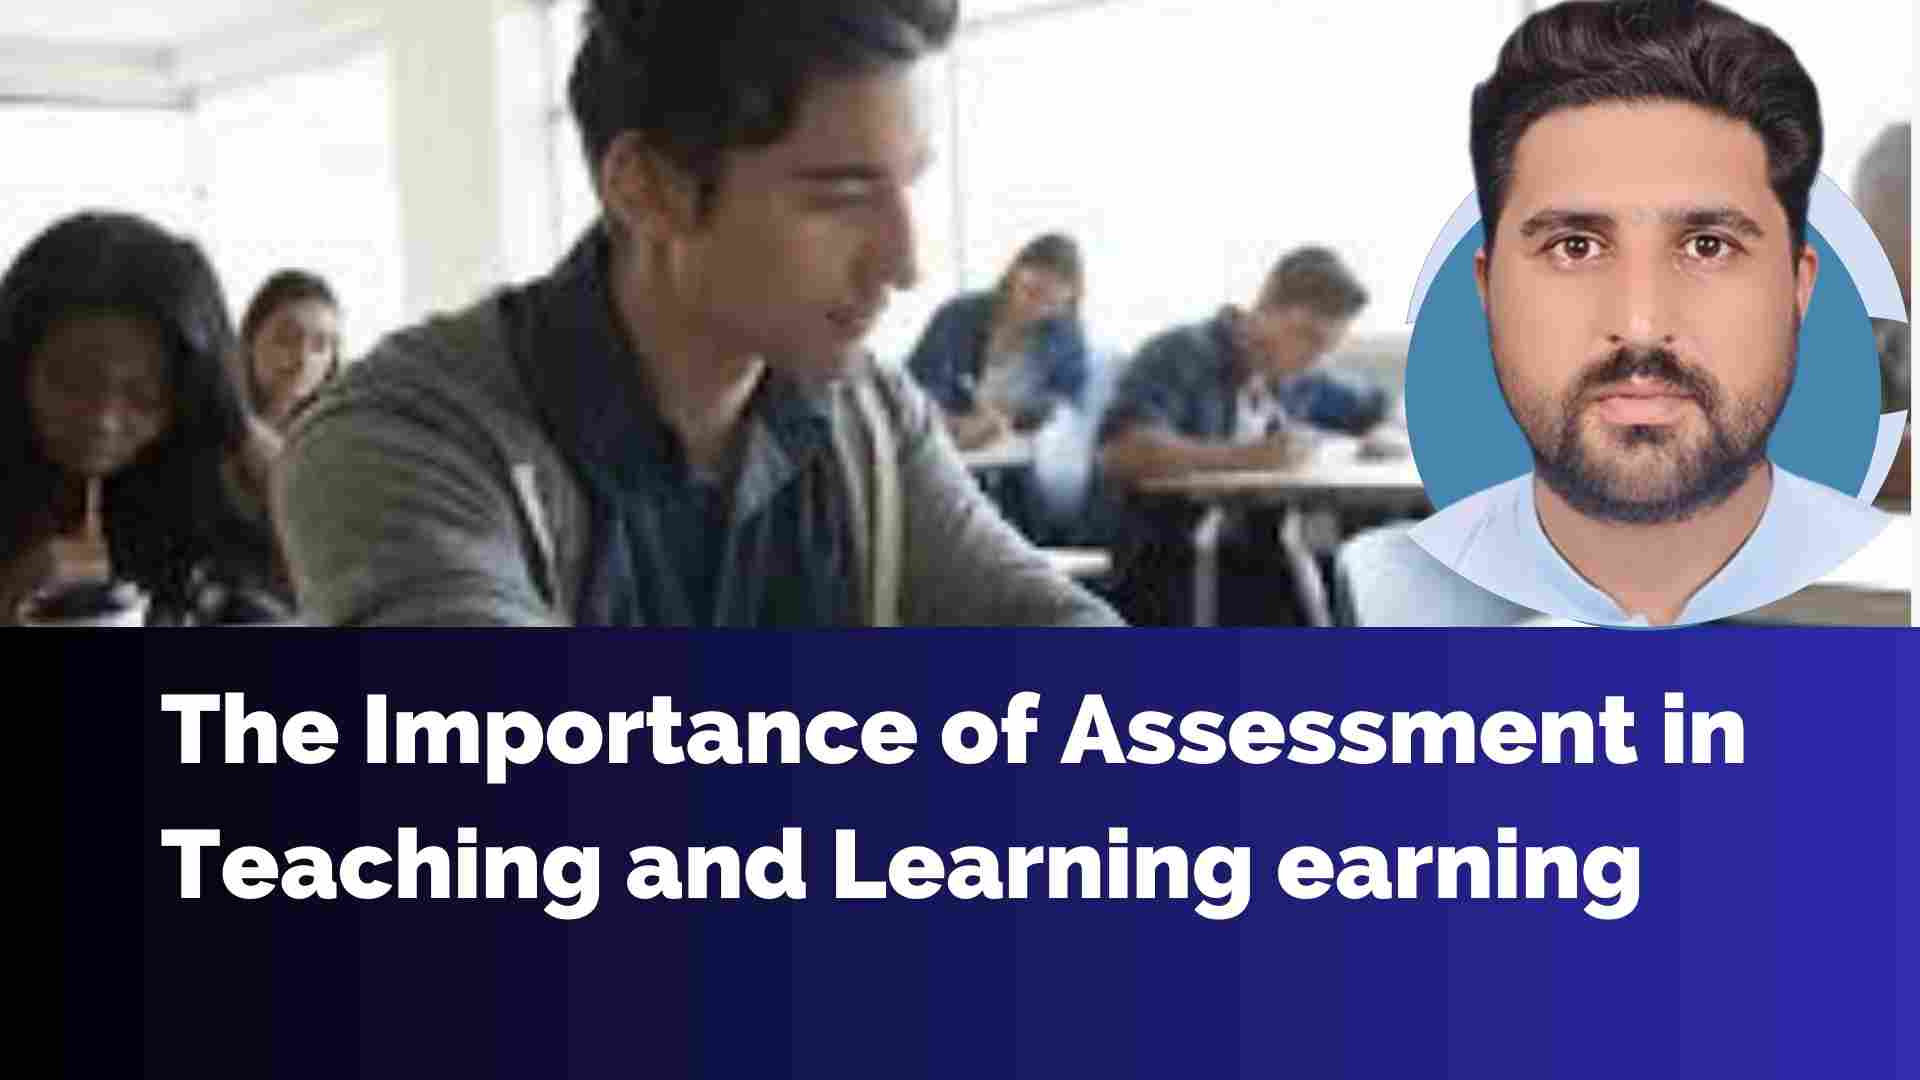 The Importance of Assessment in Teaching and Learning